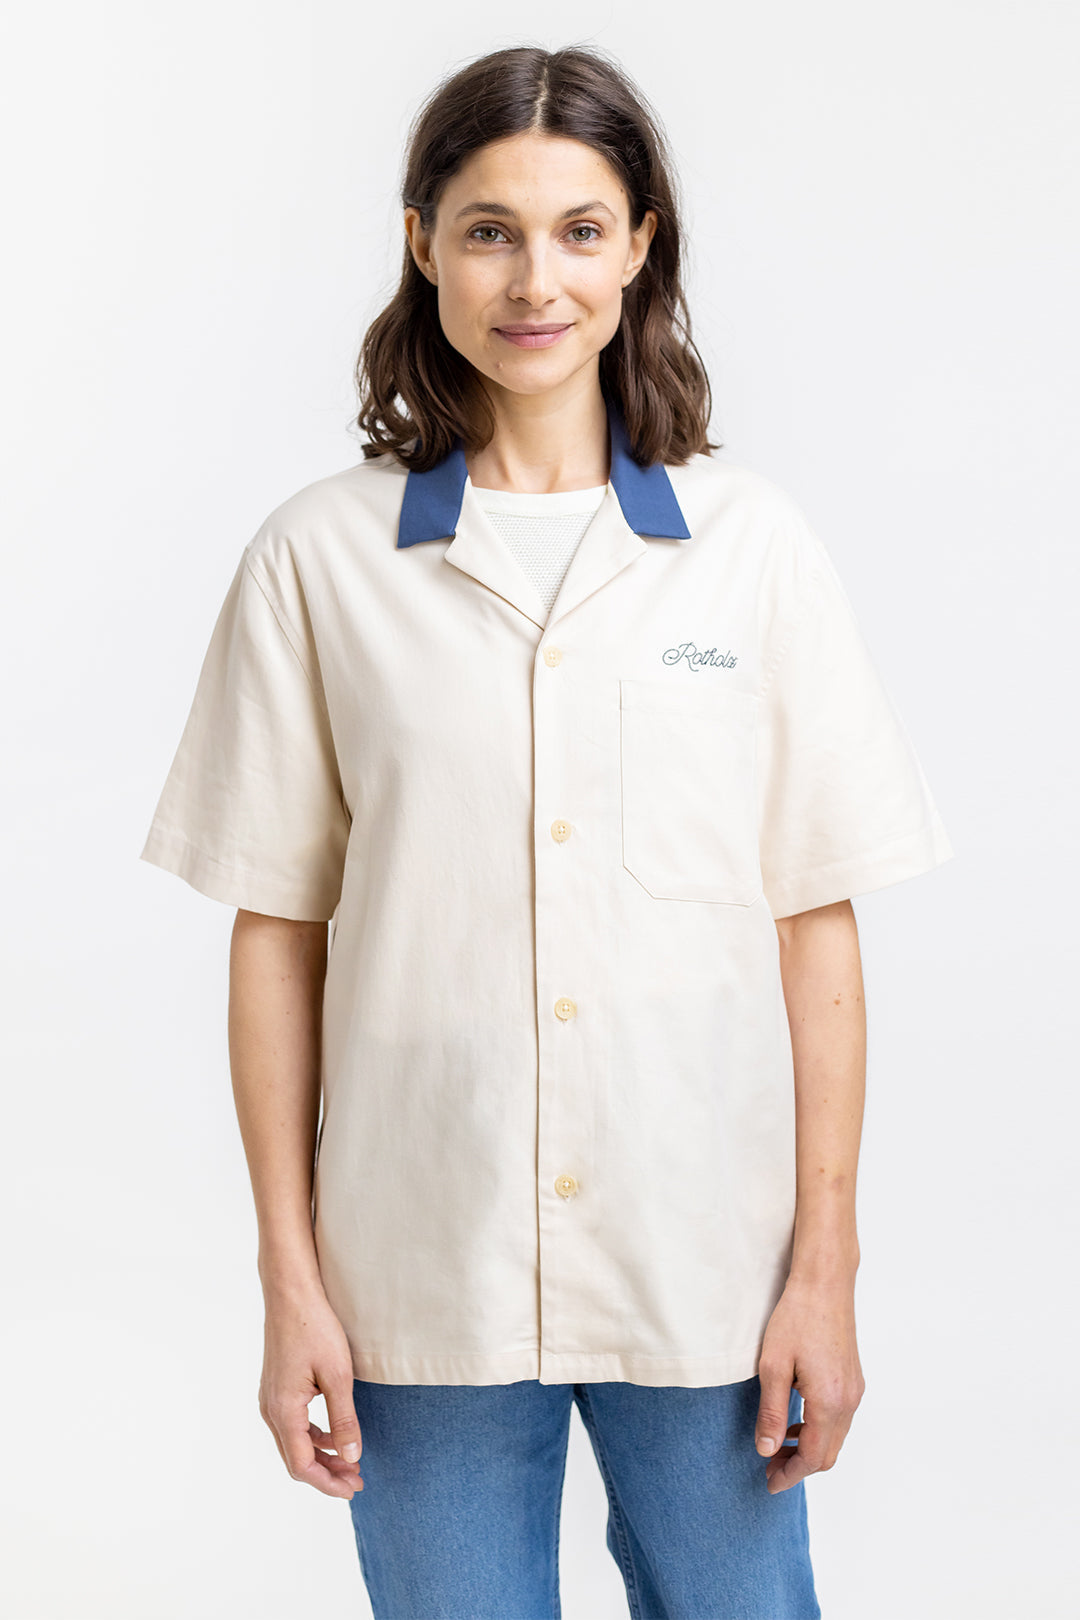 White, short-sleeved bowling shirt made from 100% organic cotton from Rotholz